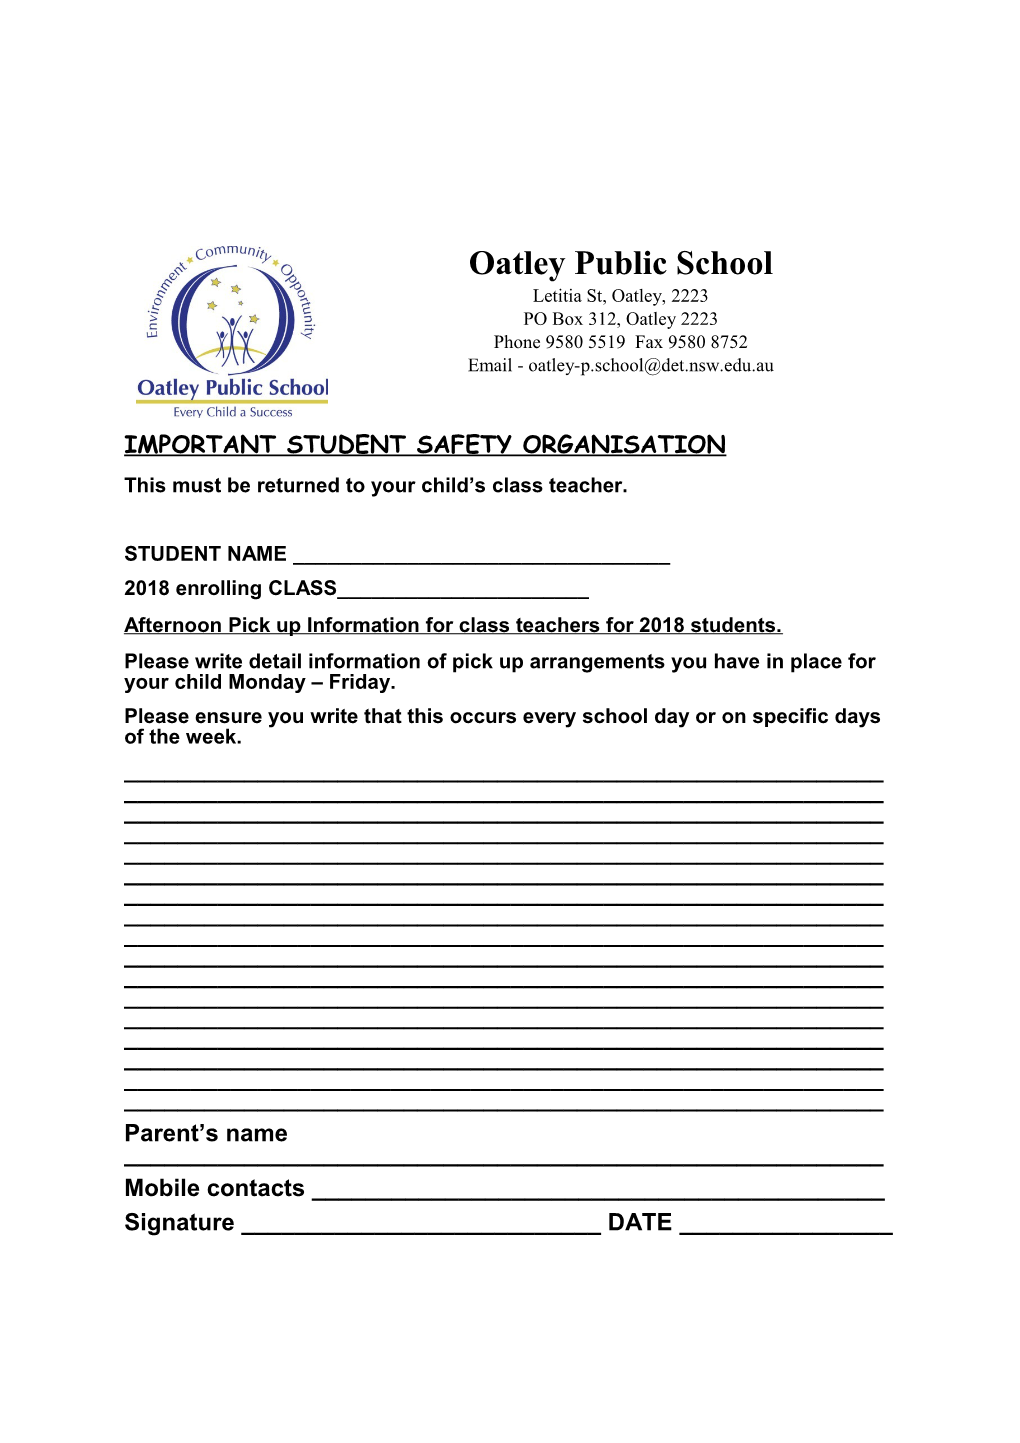 Important Student Safety Organisation